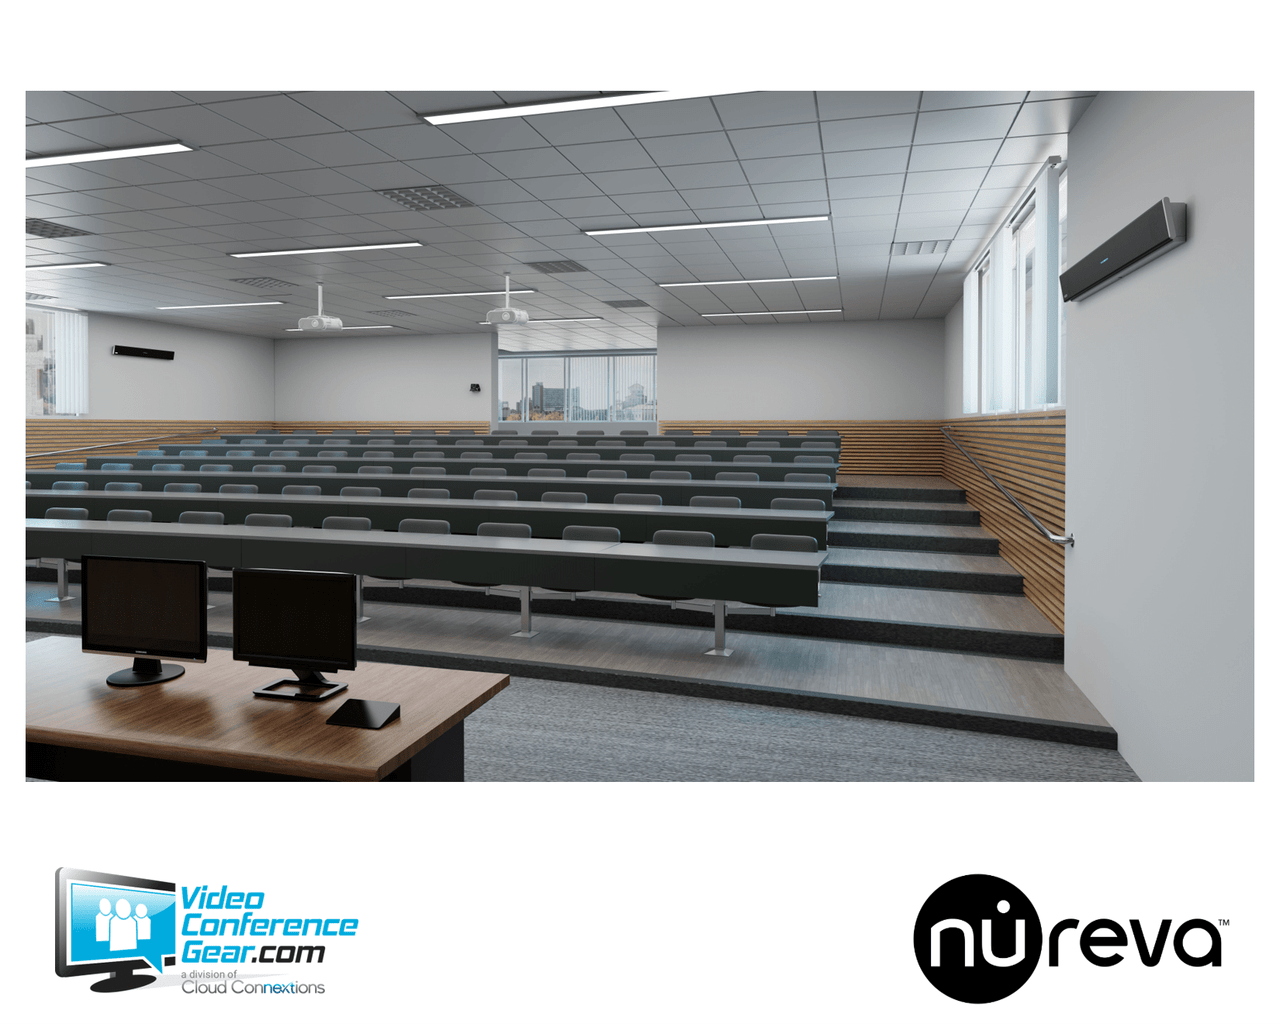 Nureva HDL410 Audio Solution for Large Meeting Spaces and Classrooms up to 35' x 55' (White)